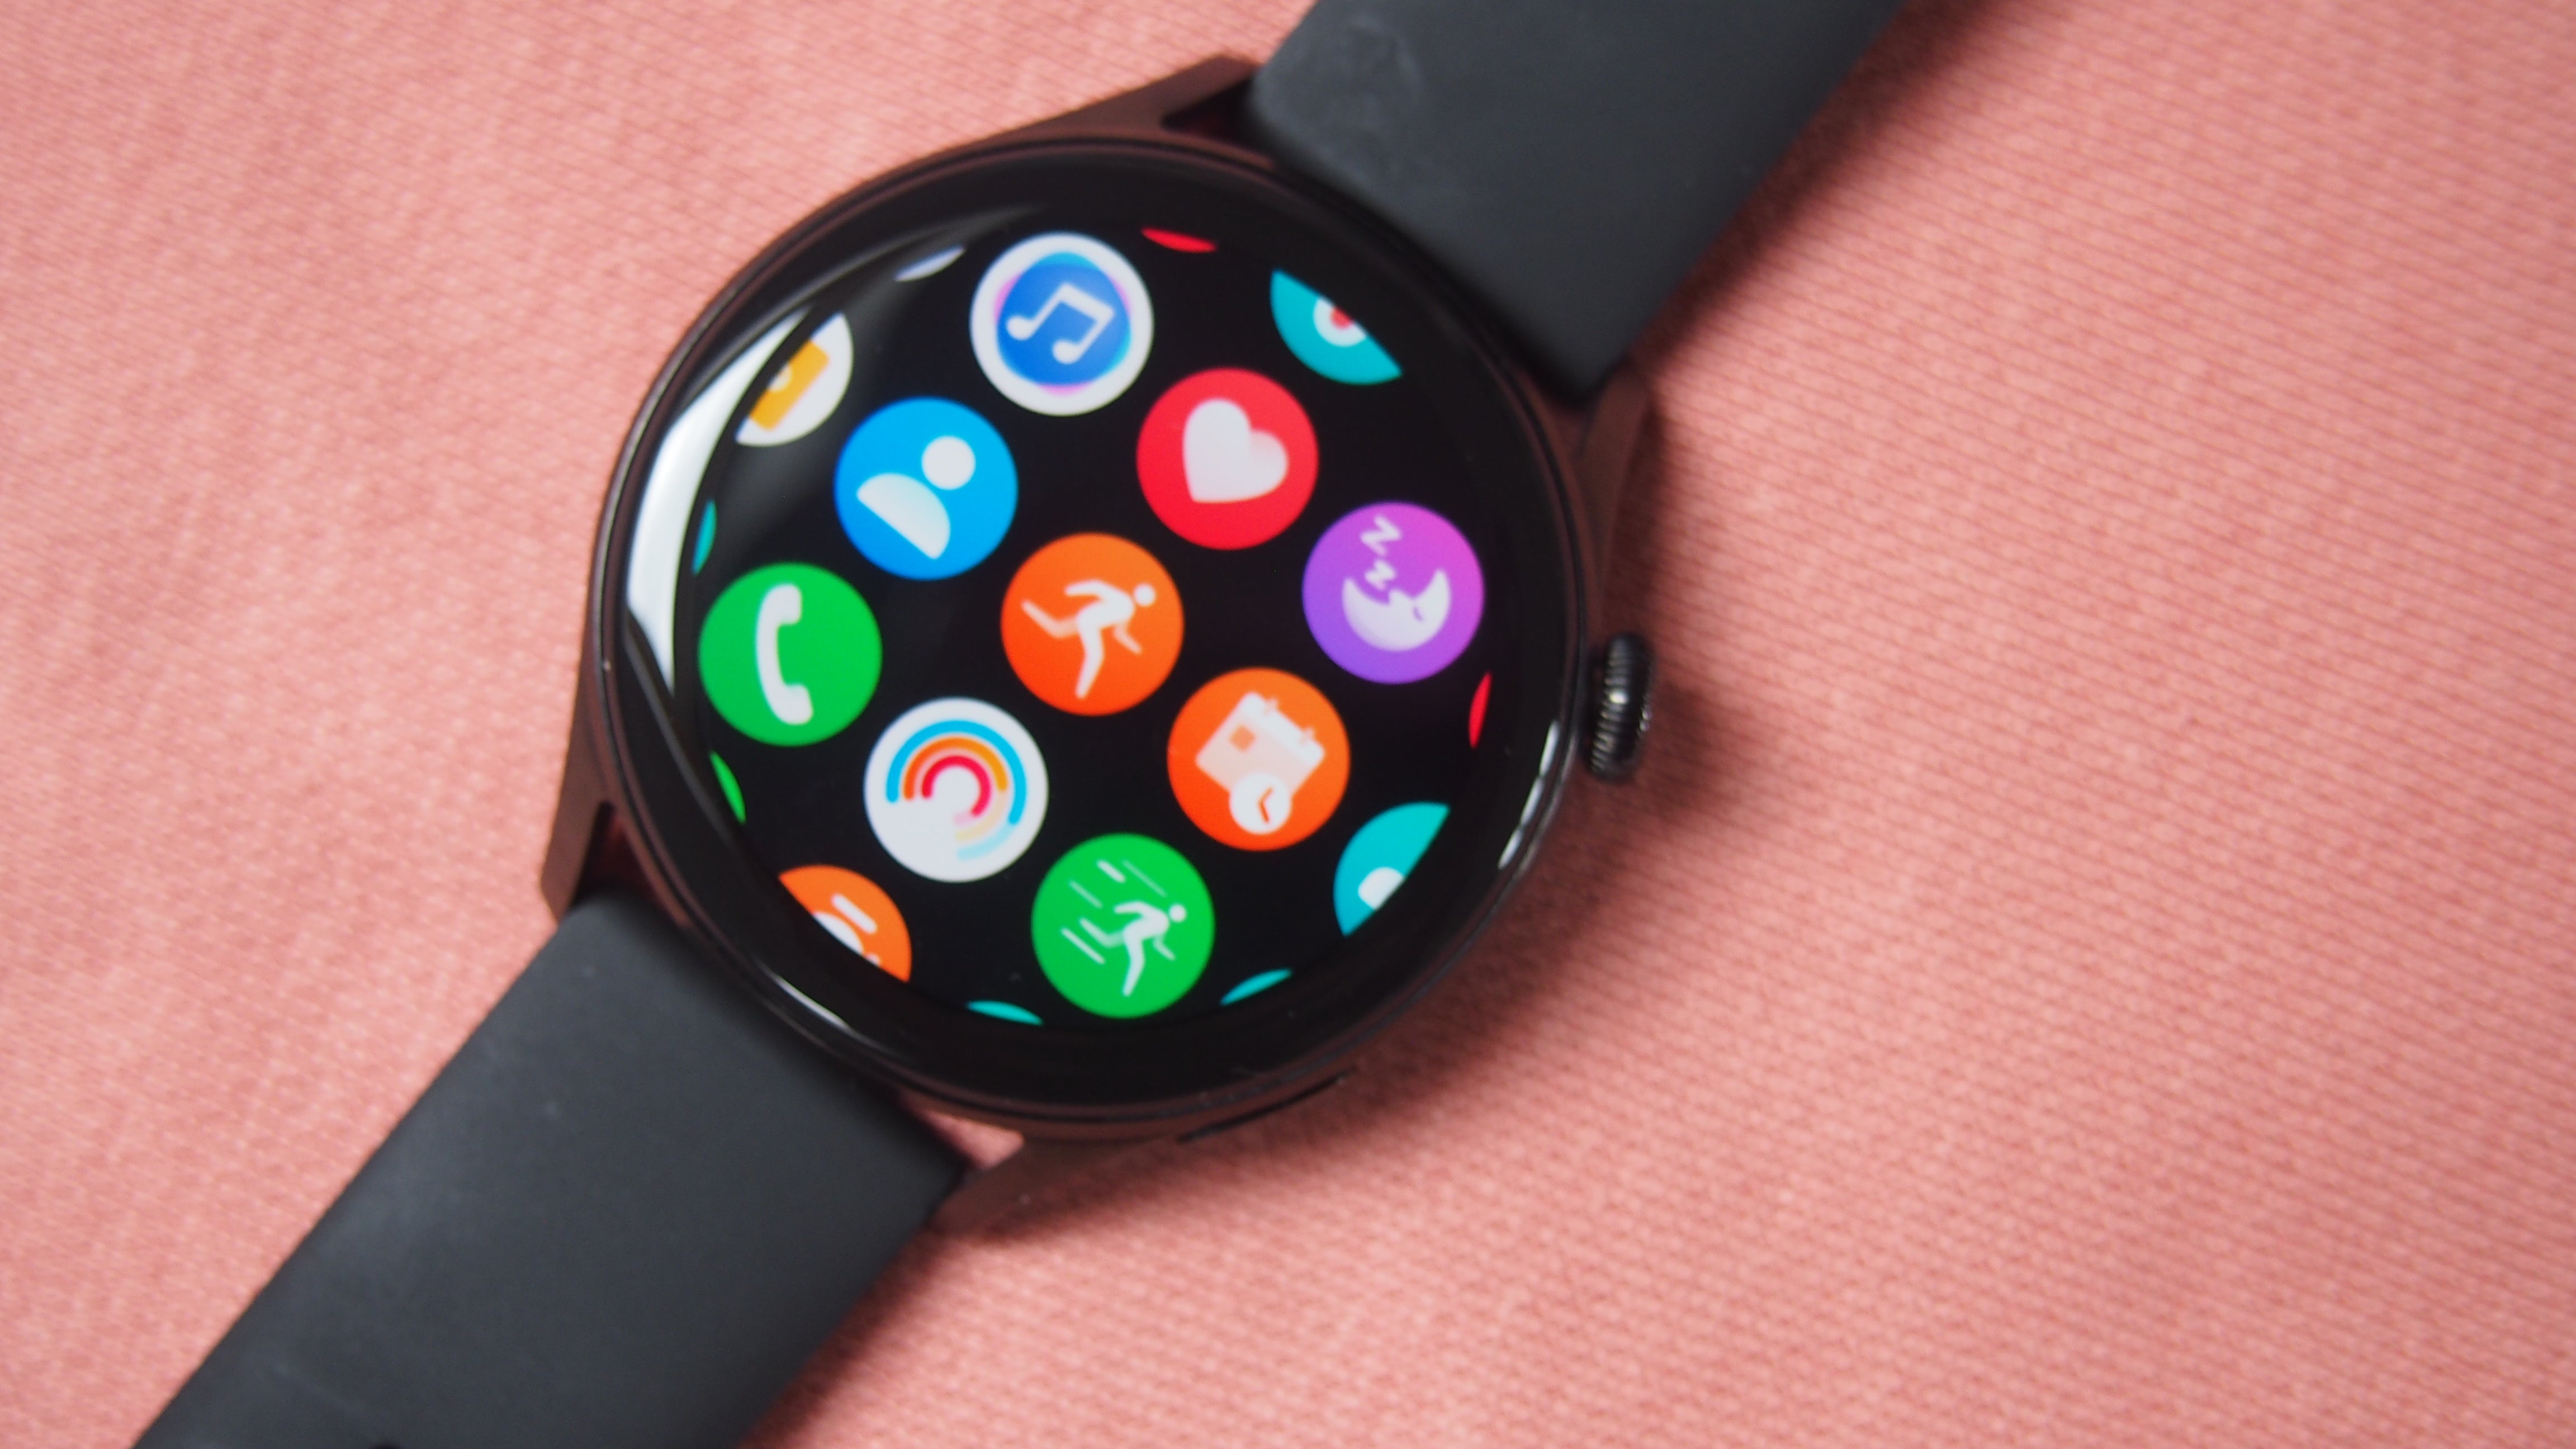 Huawei has an crazy thought for a smartwatch that is cool